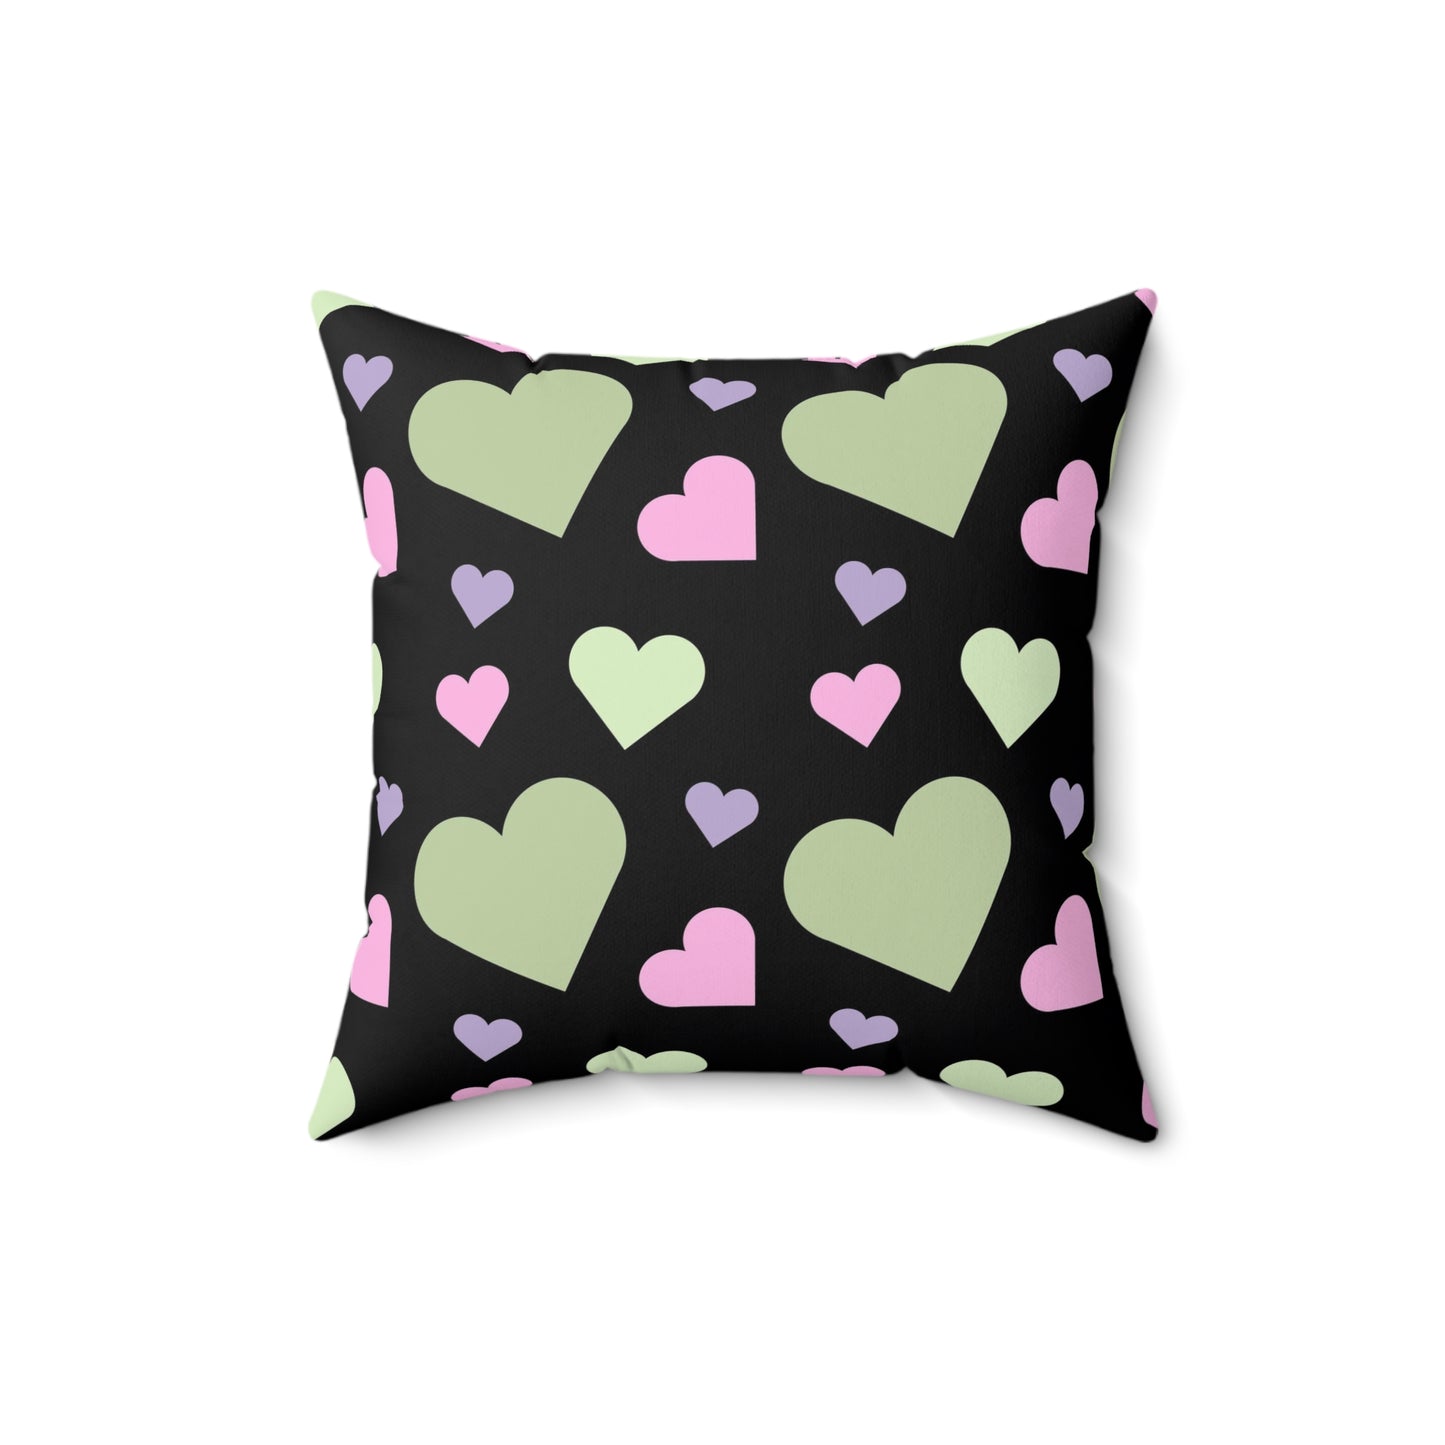 Pastel Goth Heart Throw Pillow and Throw Pillow Cover Decorative Pillow for Couch